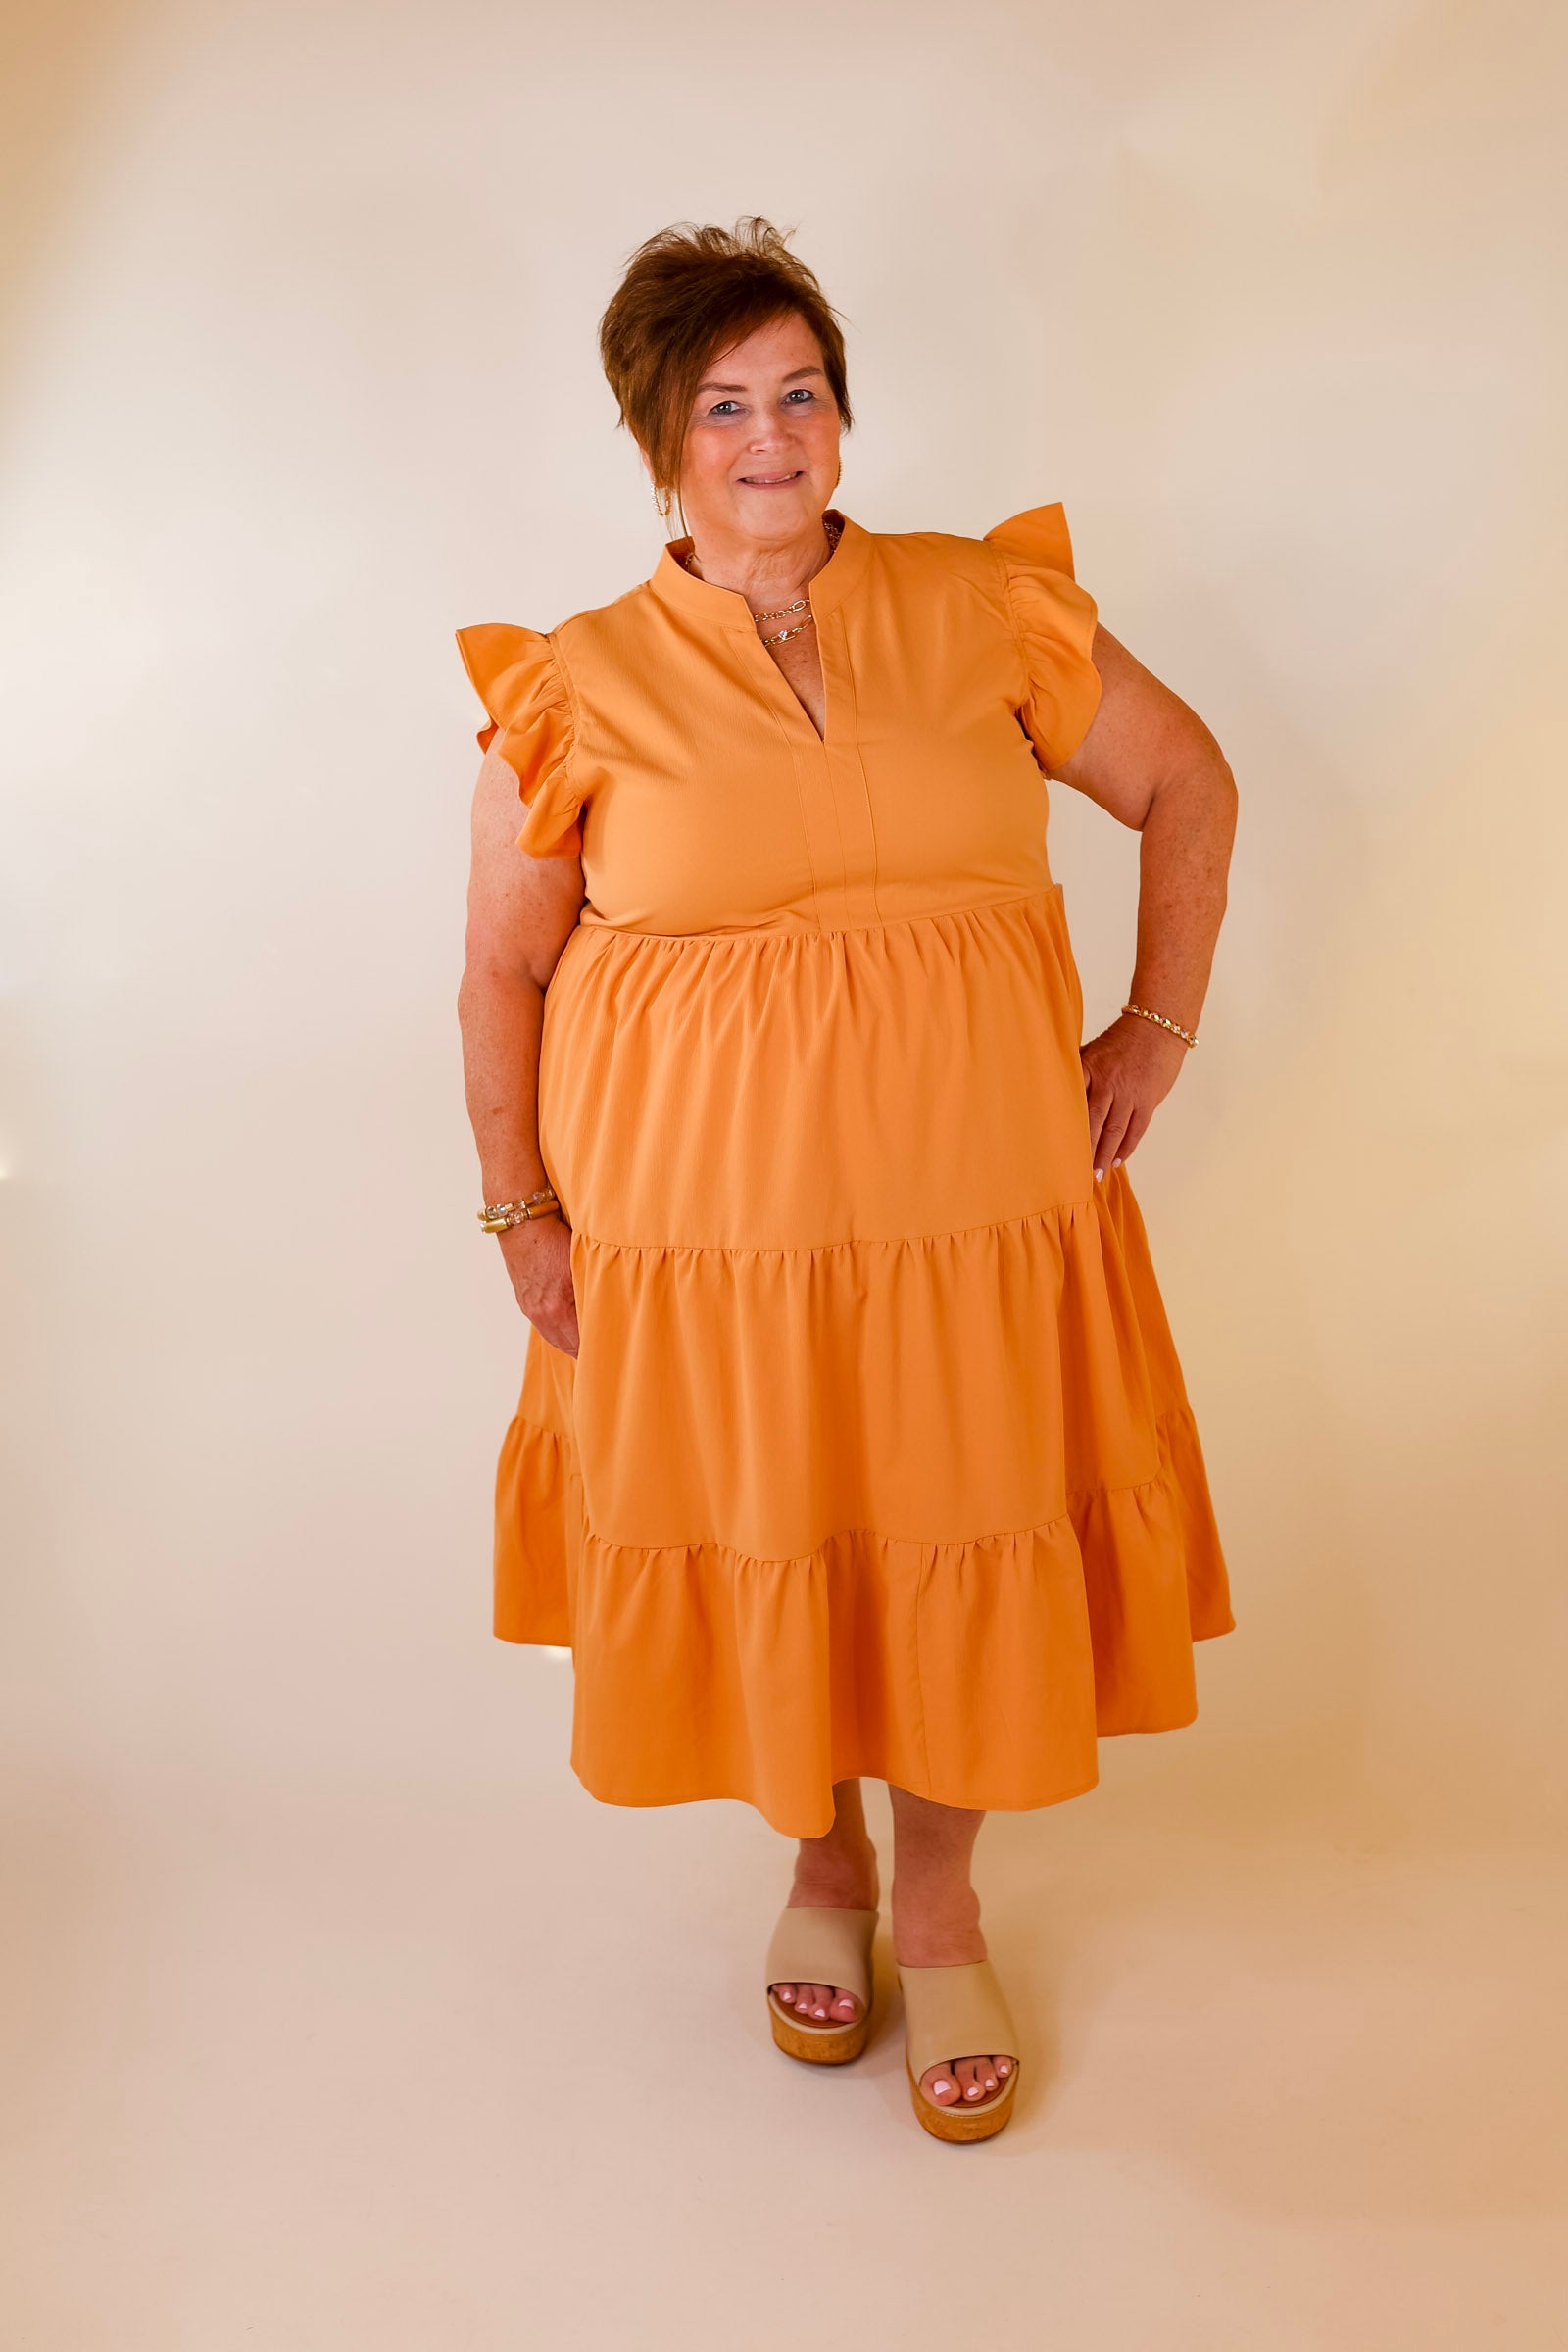 Magnolia Morning Ruffle Cap Sleeve Tiered Midi Dress in Sunset Orange - Giddy Up Glamour Boutique